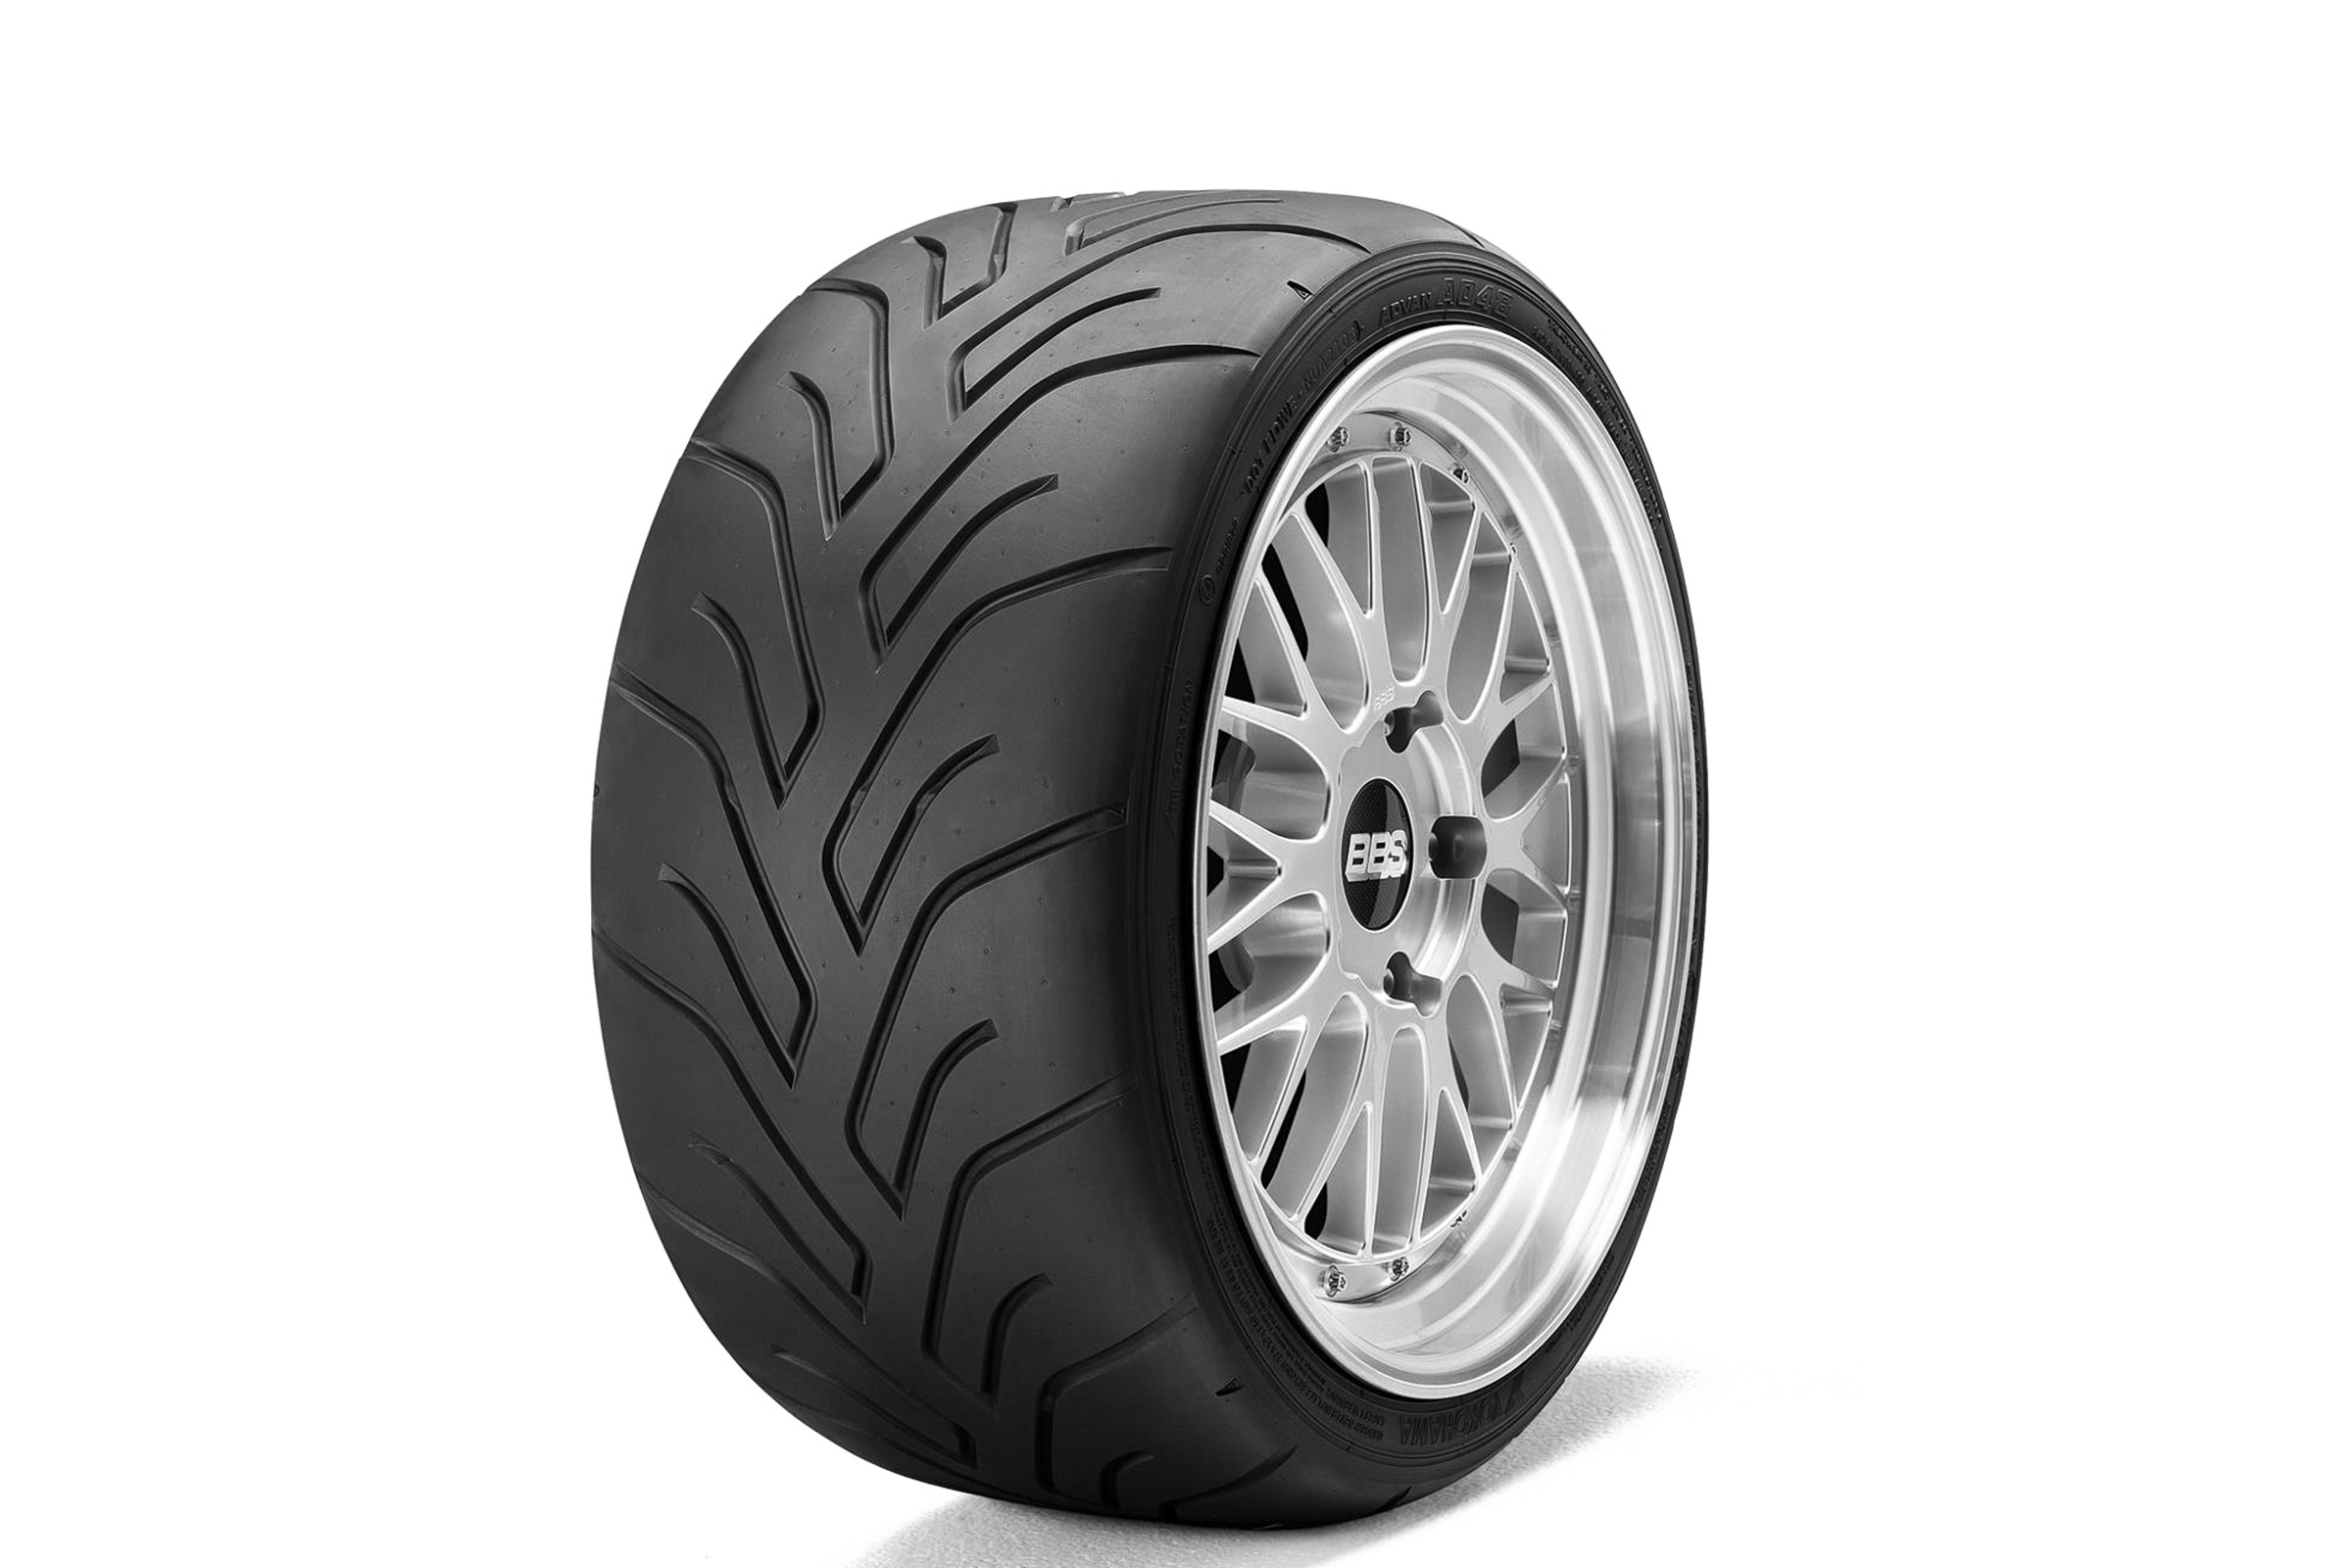 2454018 1 x 245/40/18 93Y Toyo R888R Road Legal Race|Racing|Track Day Tyre 